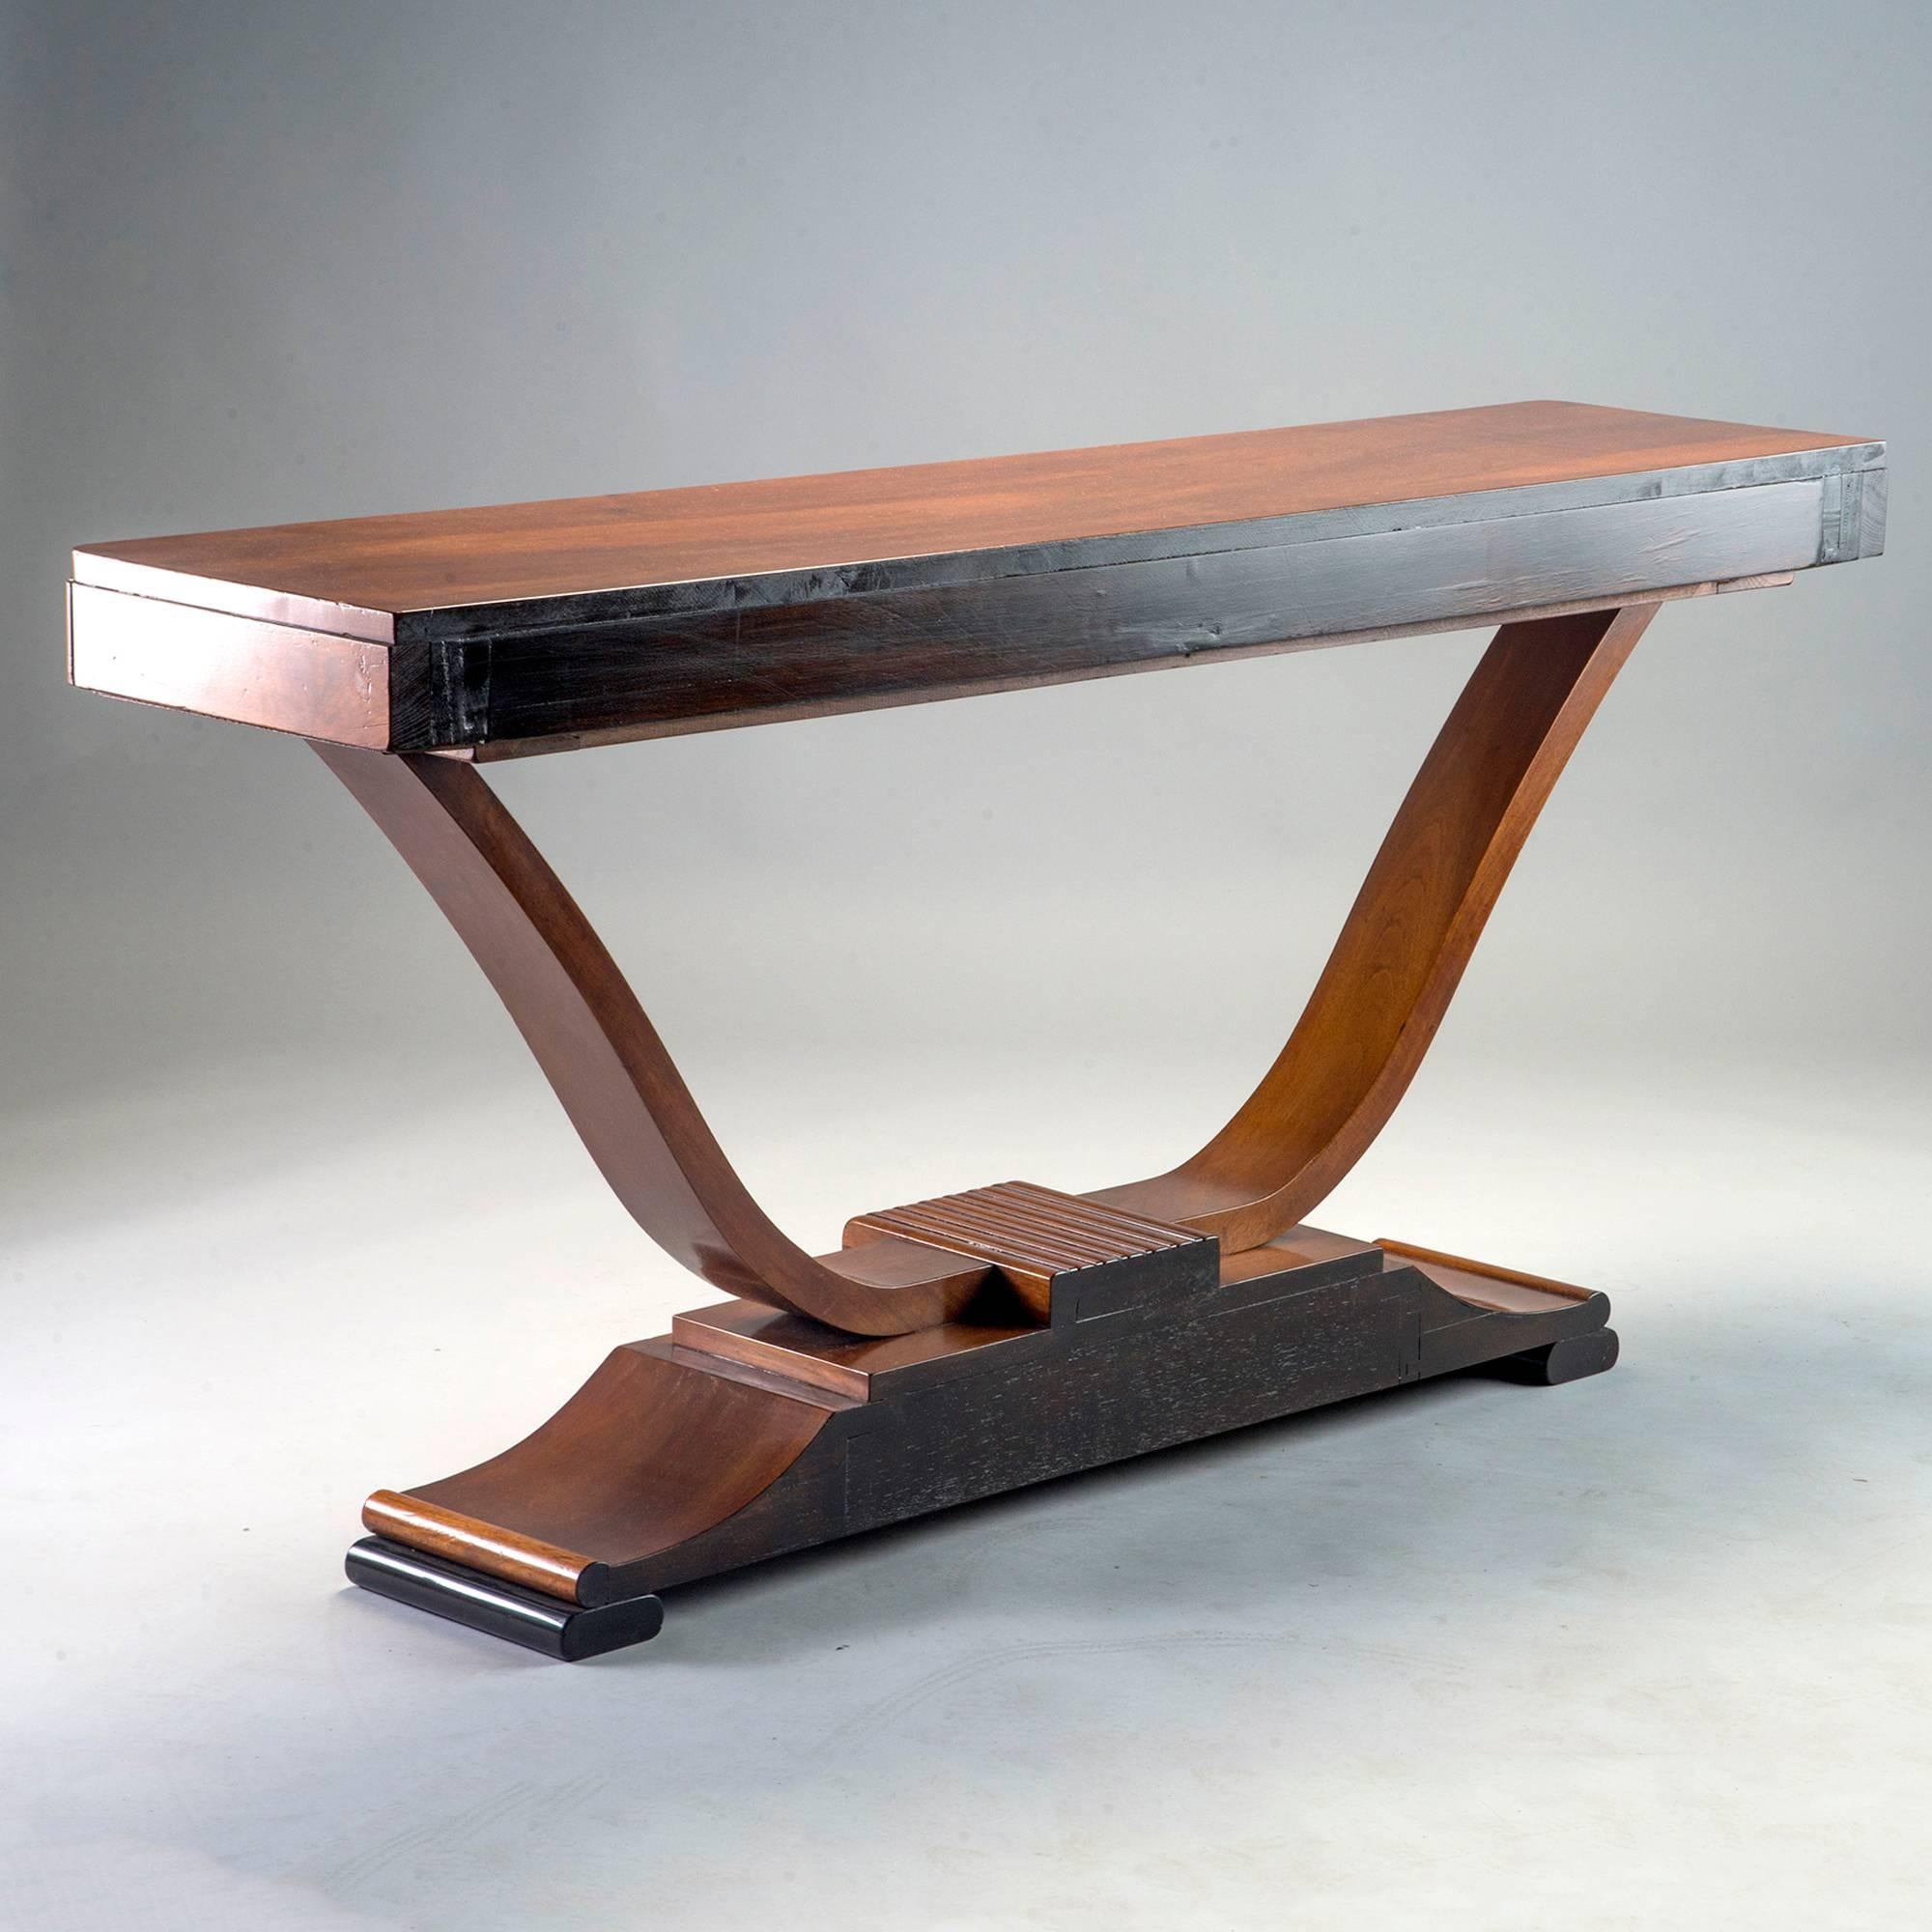 Walnut Art Deco console features a pedestal base with contrasting ebonized feet, open curved supports and a carved ebonized panel depicting a leaping buck, circa 1930s. Found in Belgium.